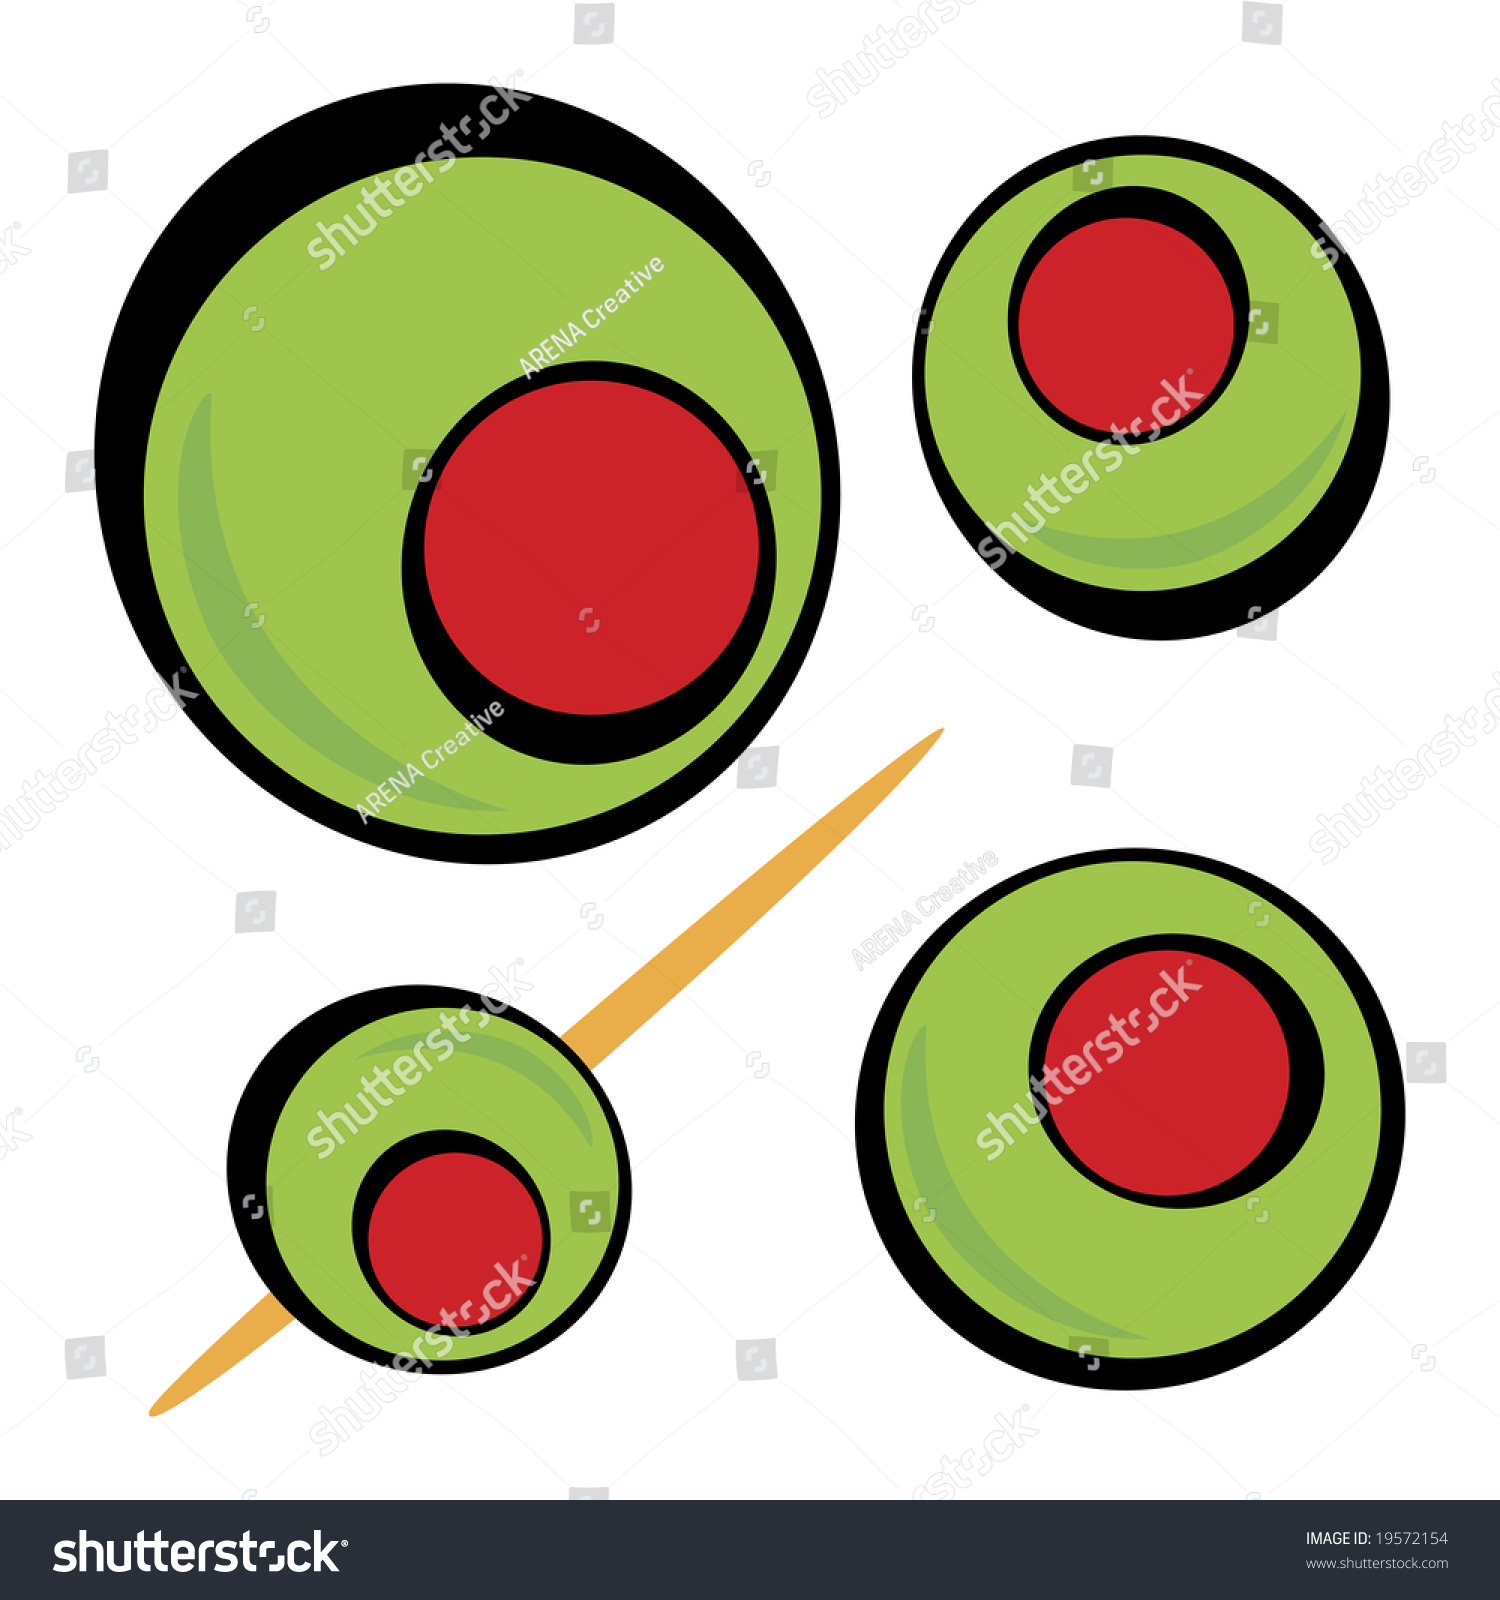 green olive clipart - photo #31